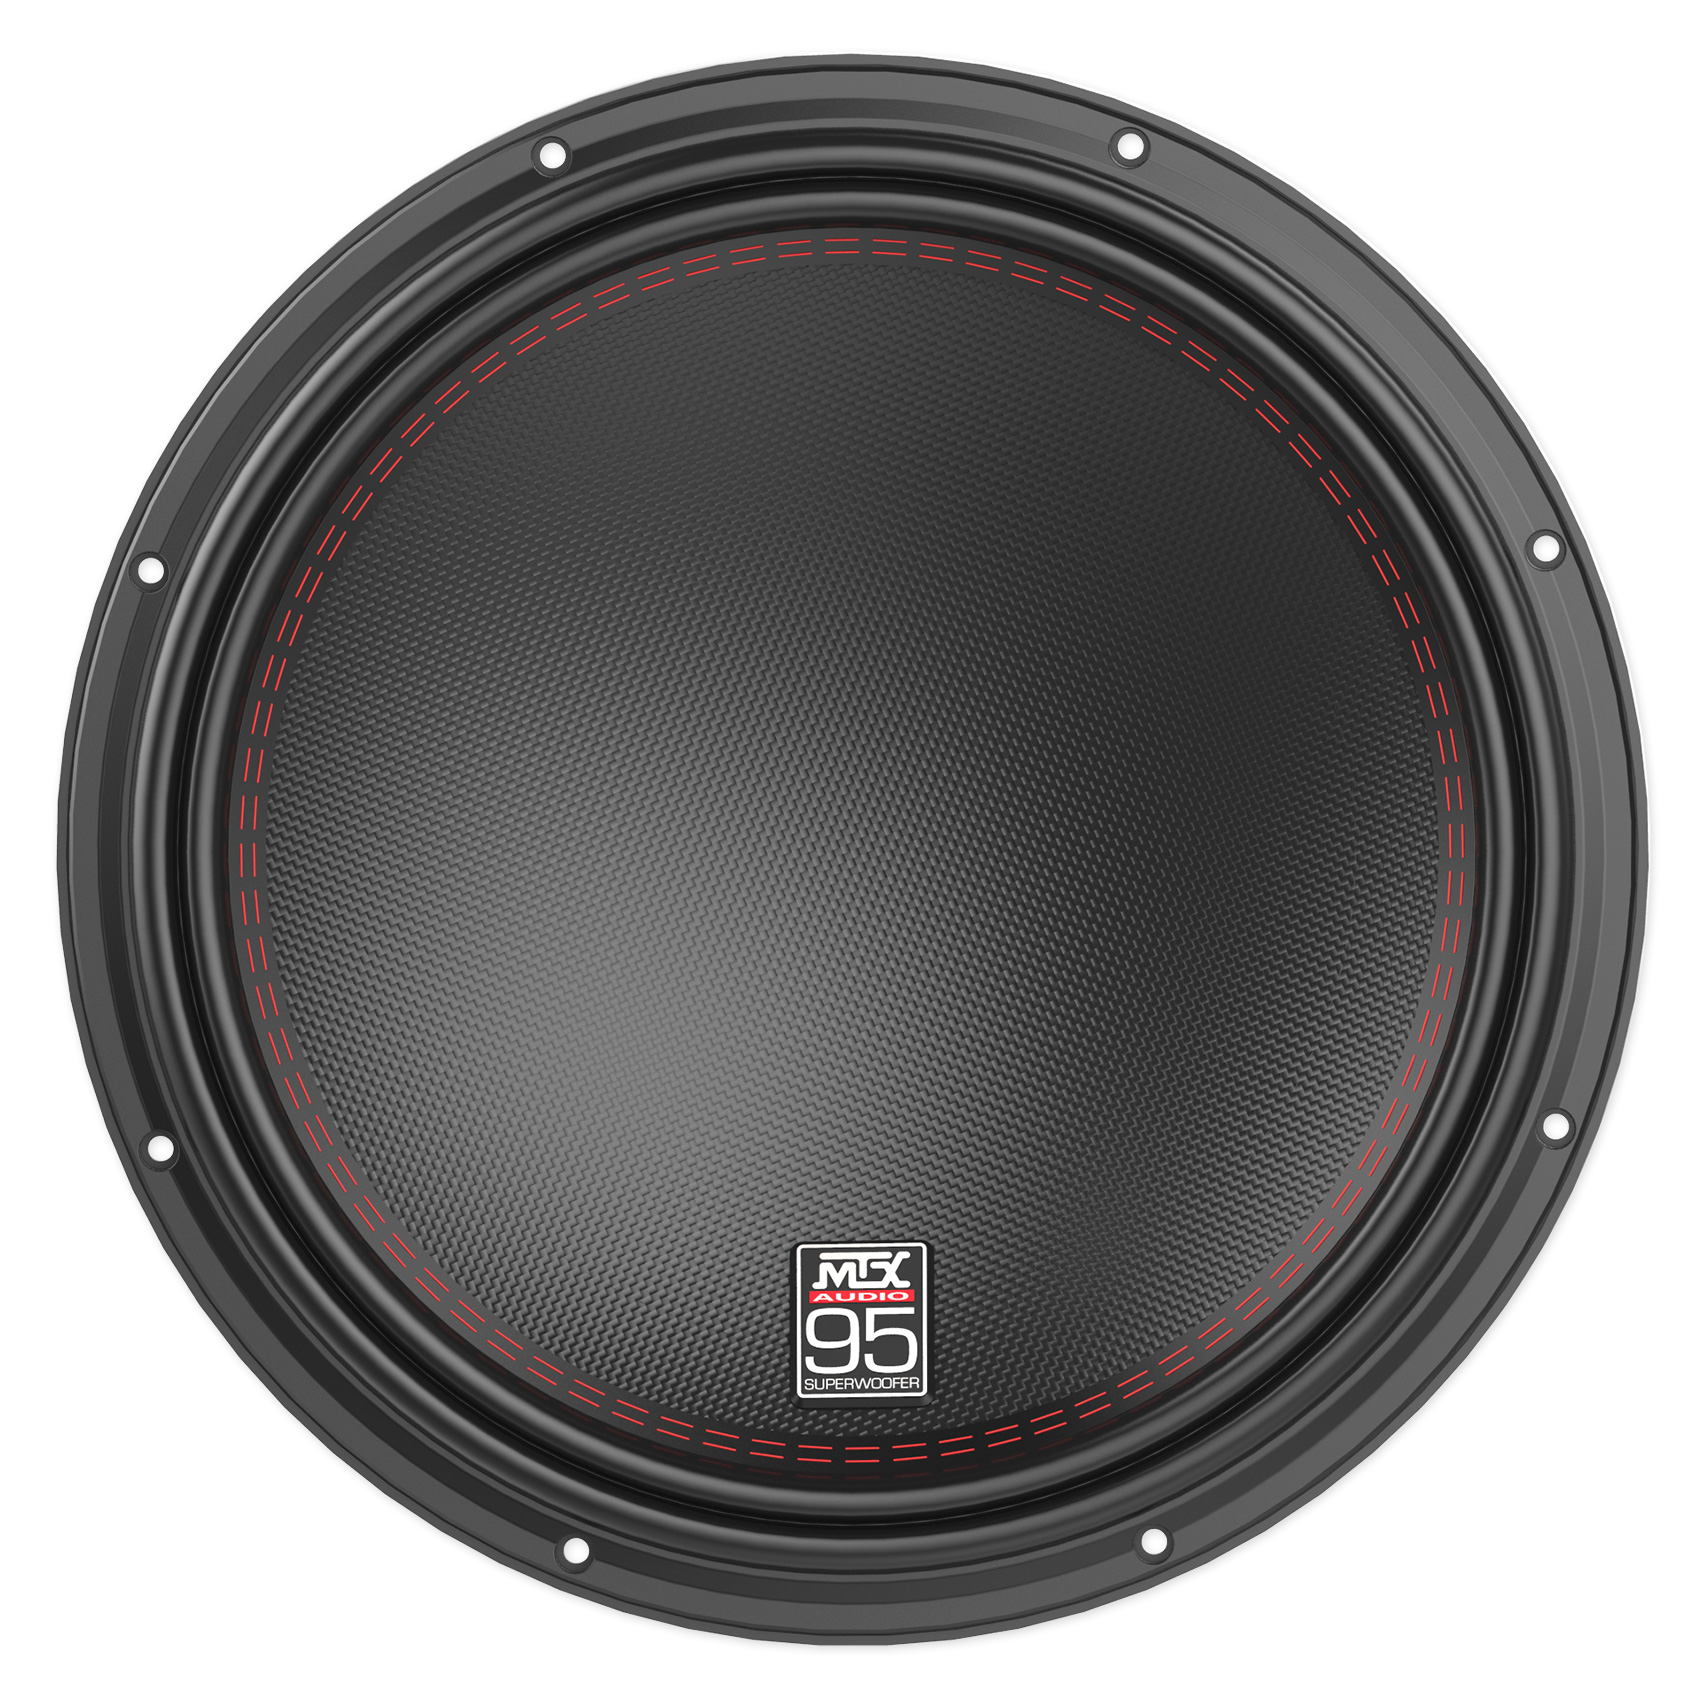 (2) MTX 9515-22 15" 3000 Watt RMS Competition Subwoofers DVC Car Audio Subs - image 3 of 8